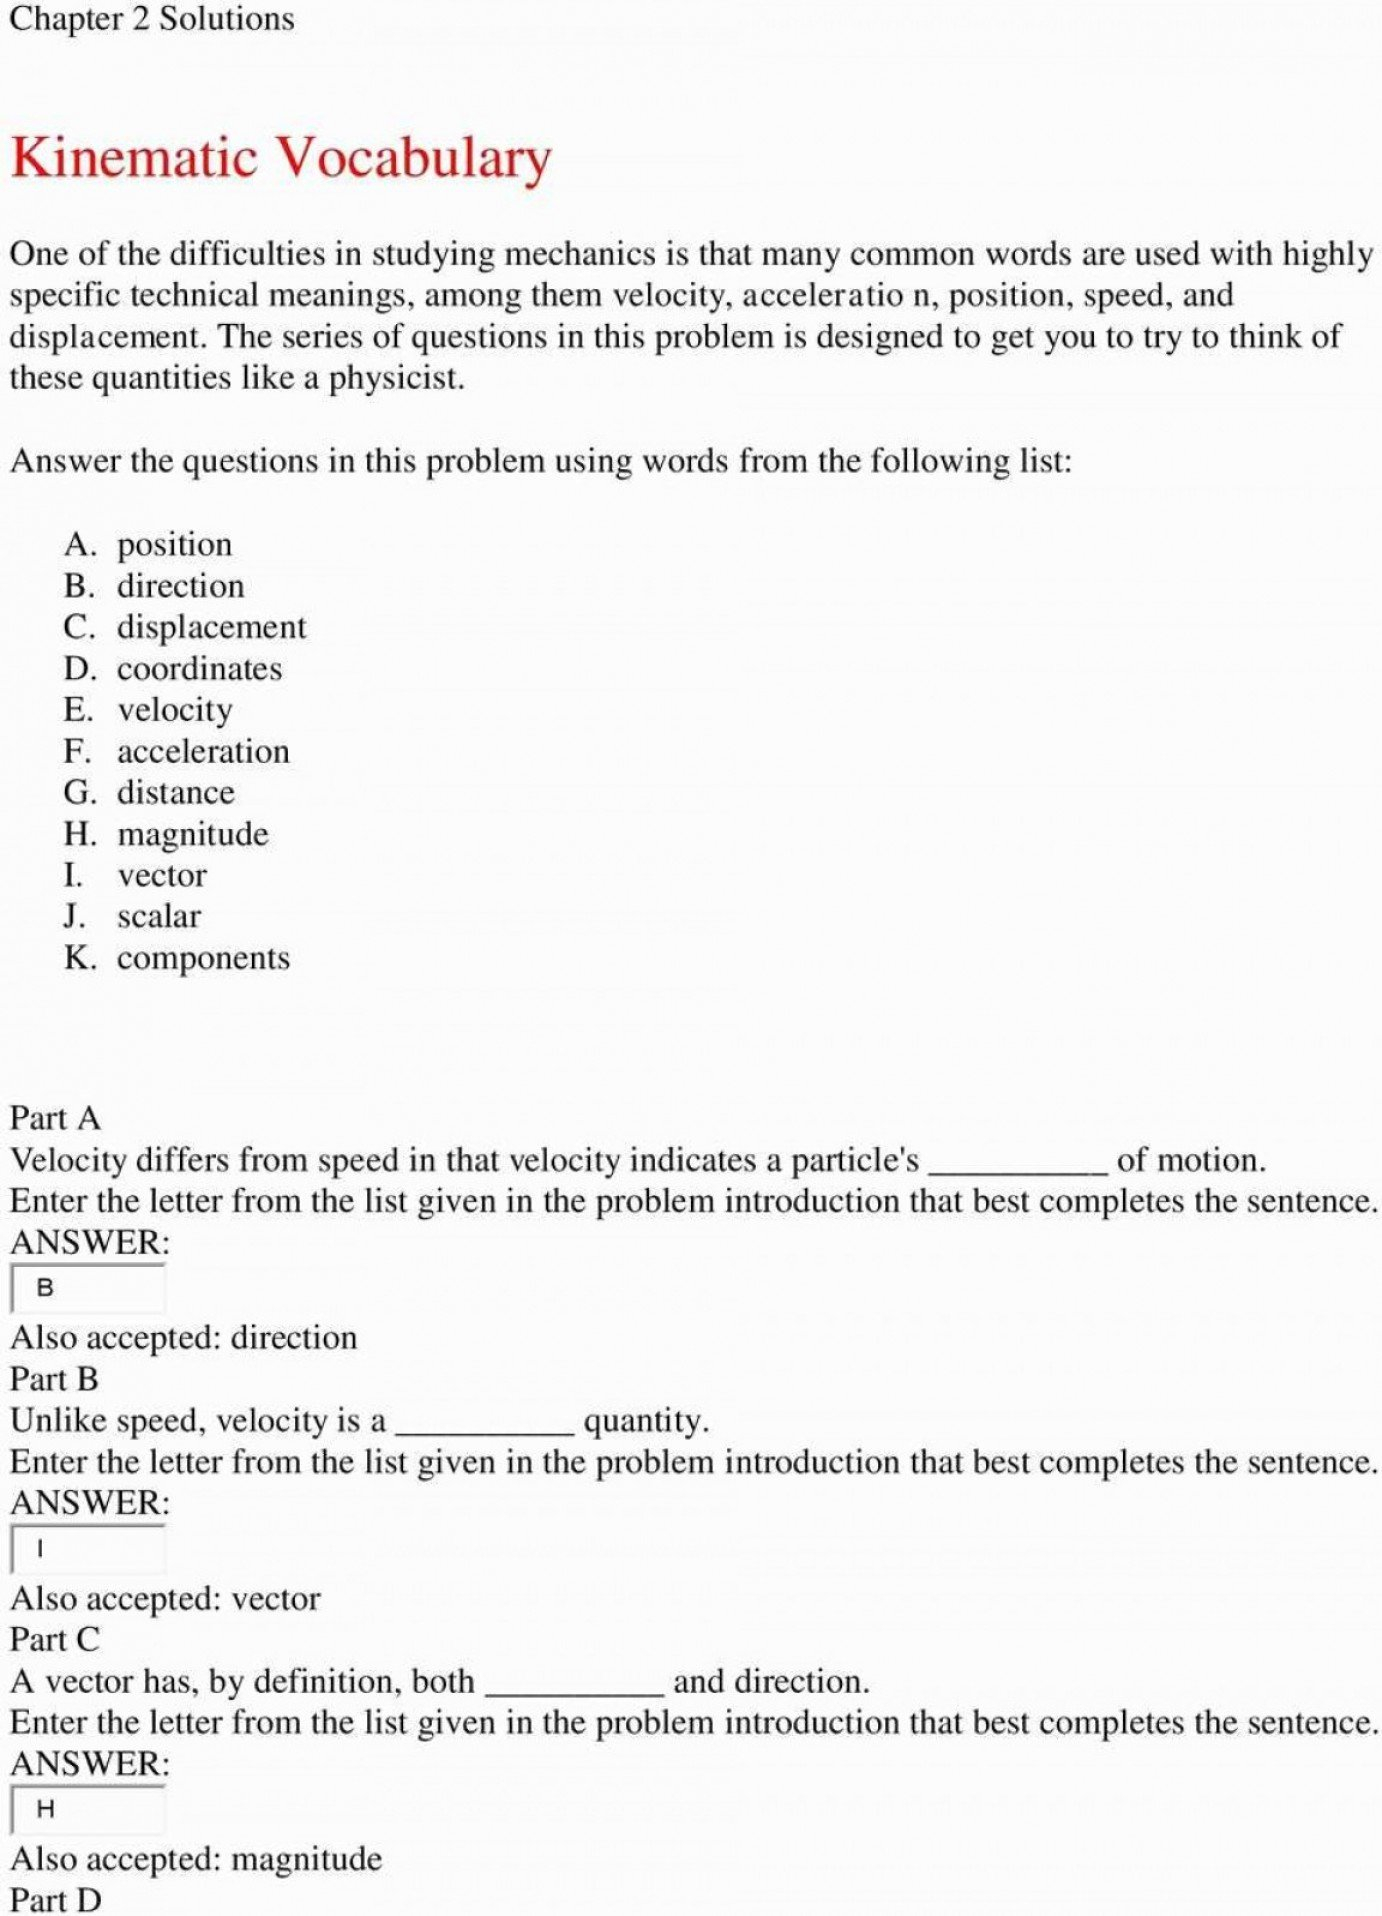 Projectile Motion Worksheet Answers The Physics Classroom Projectile With Regard To Projectile Motion Worksheet Answers The Physics Classroom